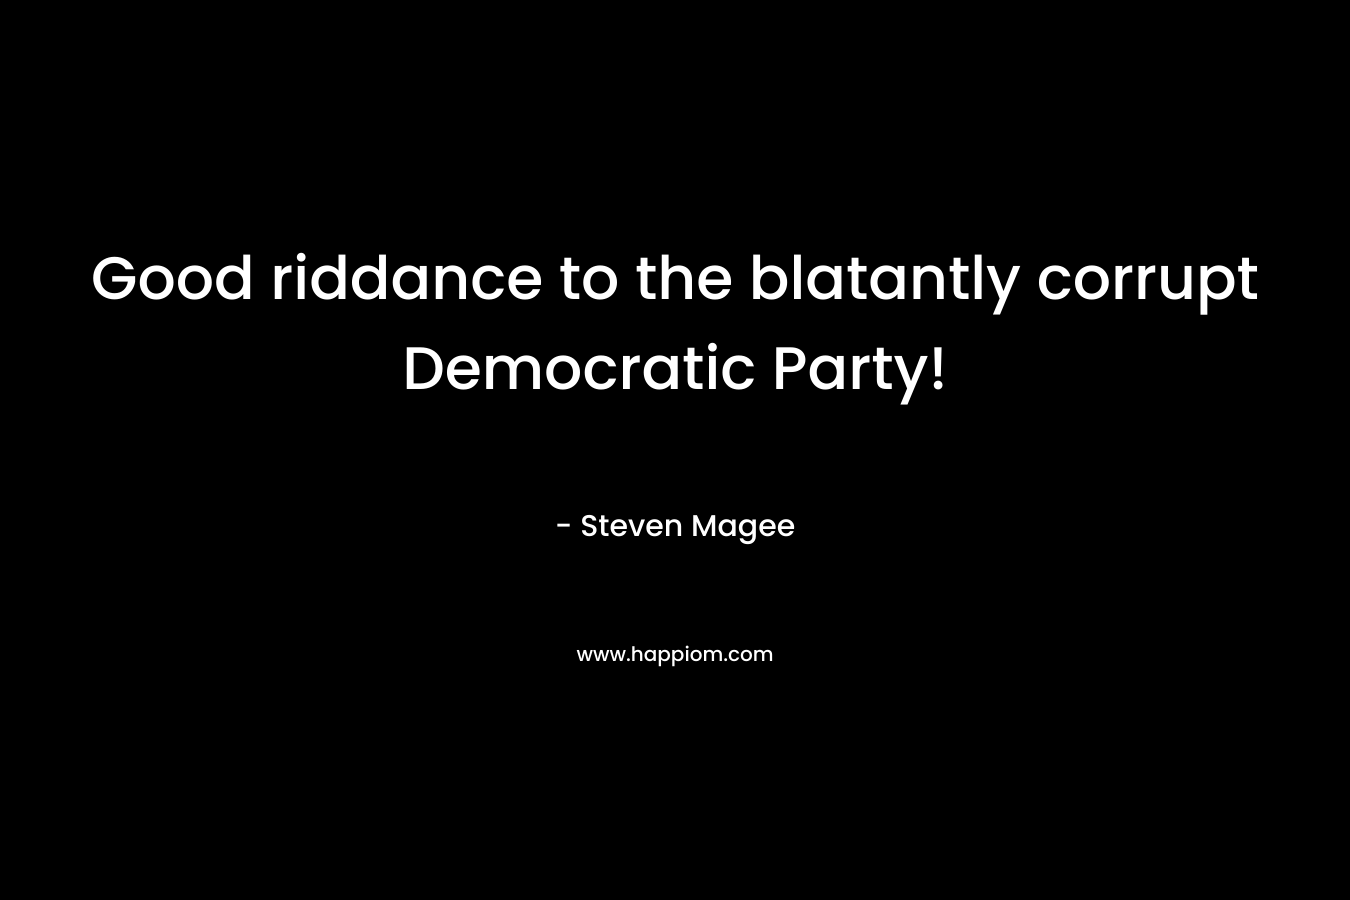 Good riddance to the blatantly corrupt Democratic Party! – Steven Magee